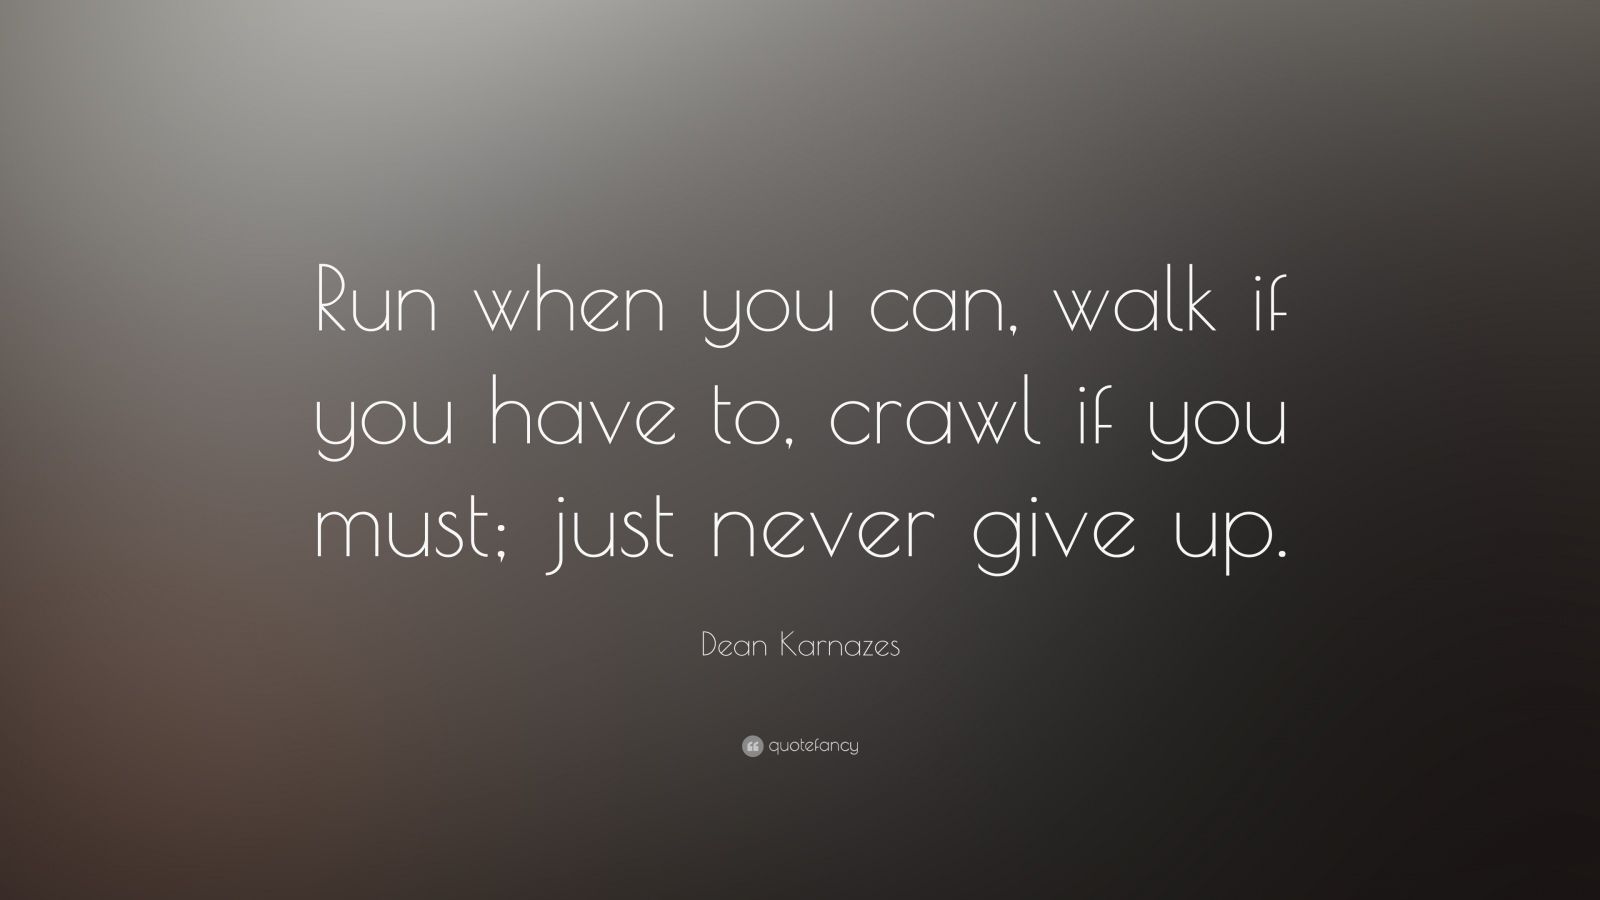 Dean Karnazes Quote: “Run when you can, walk if you have to, crawl if ...